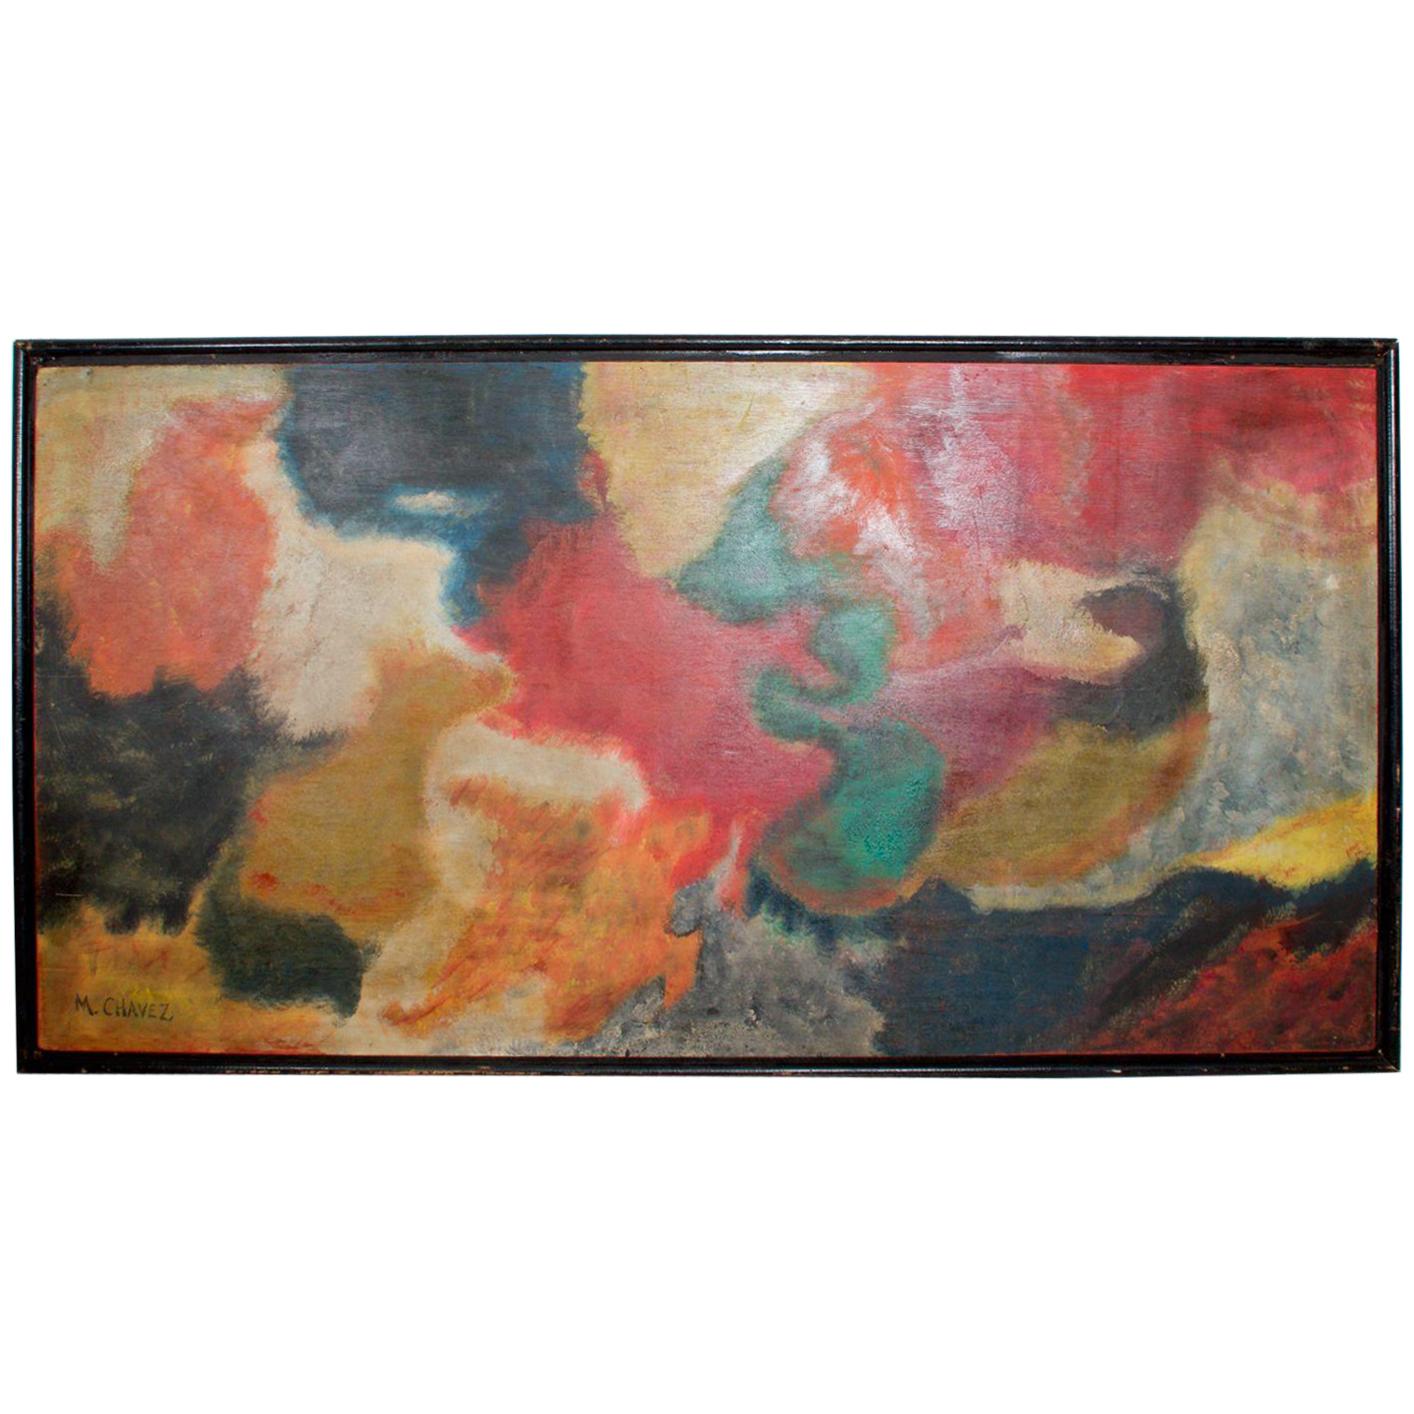 1970s Abstract Art Swirling Colors Acrylic on Wood Artist M. Chavez